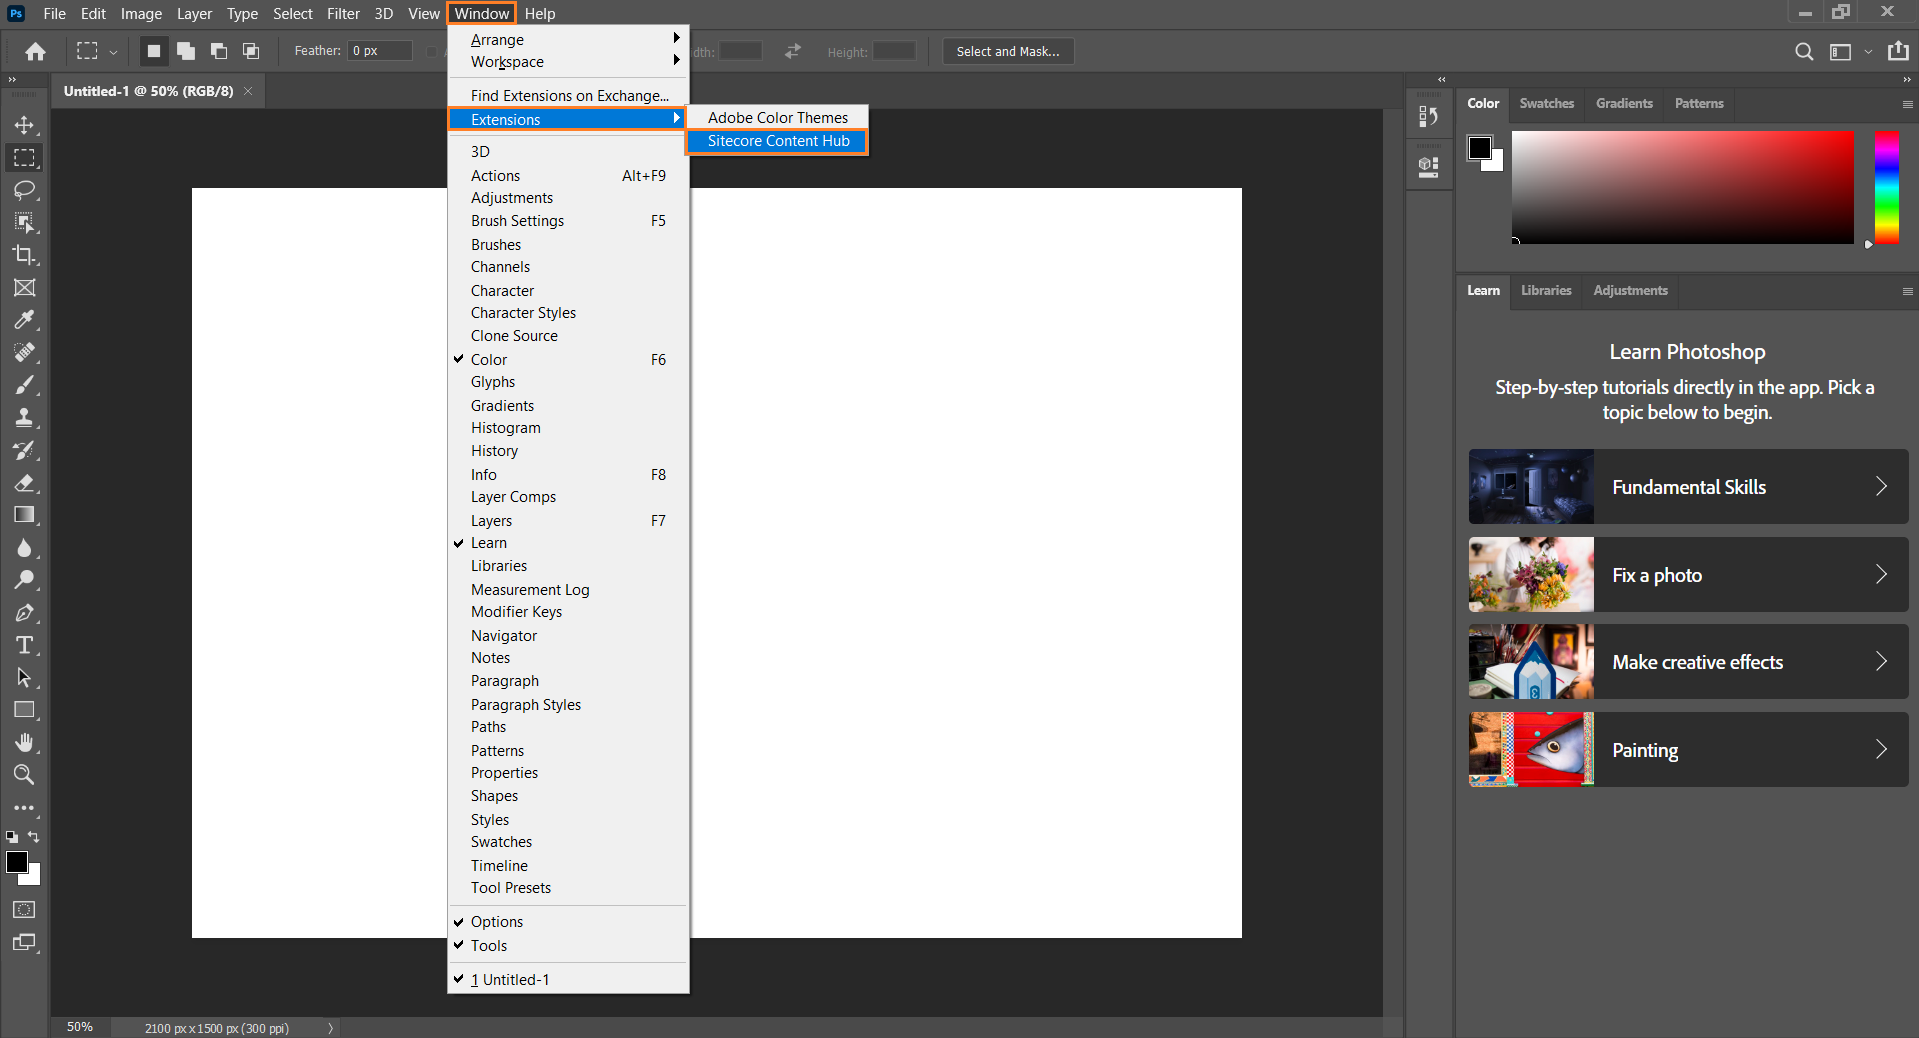 photoshop with window menu extensions and sitecore content hub highlighted: photoshop_sitecore_extension_highlighted.png